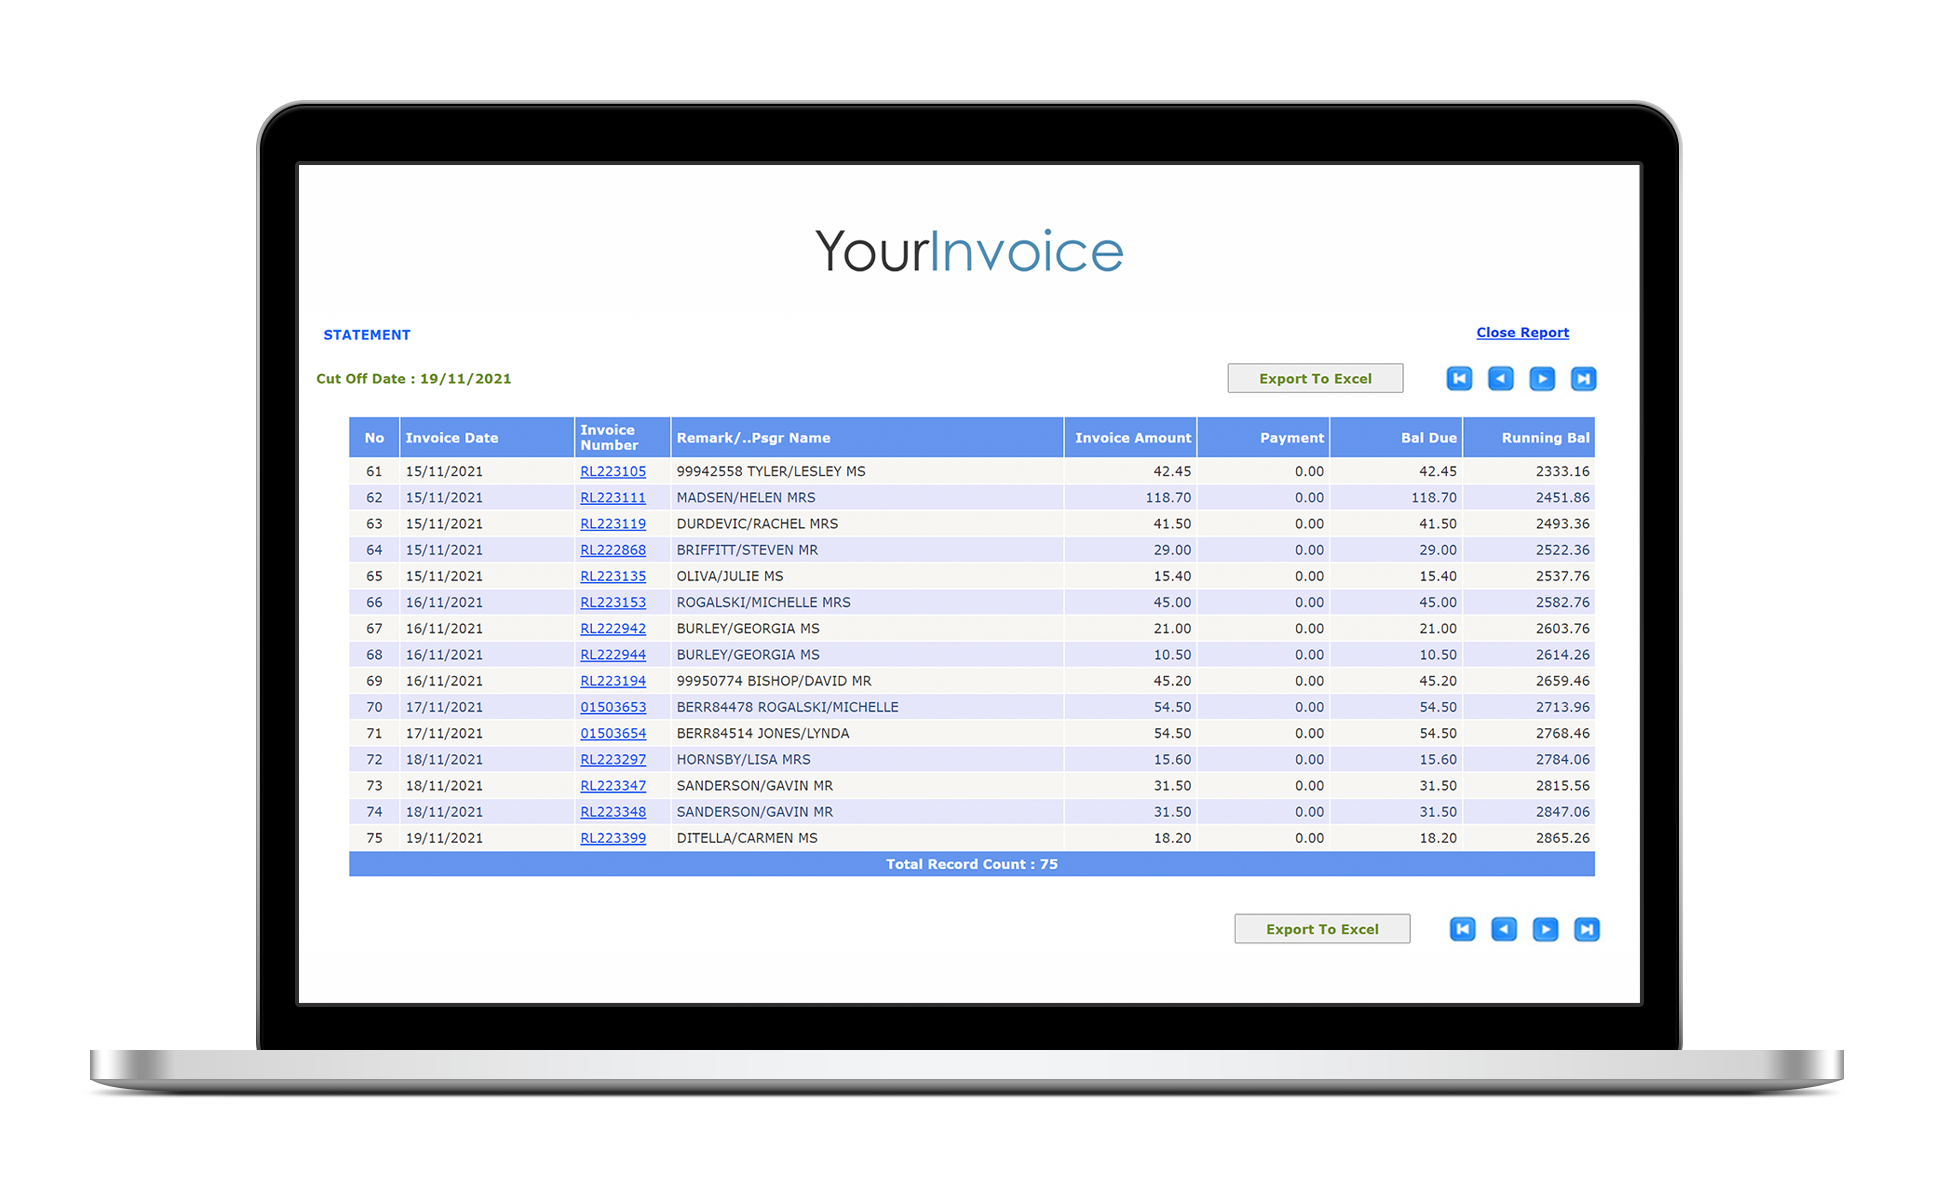 YourInvoice statement page